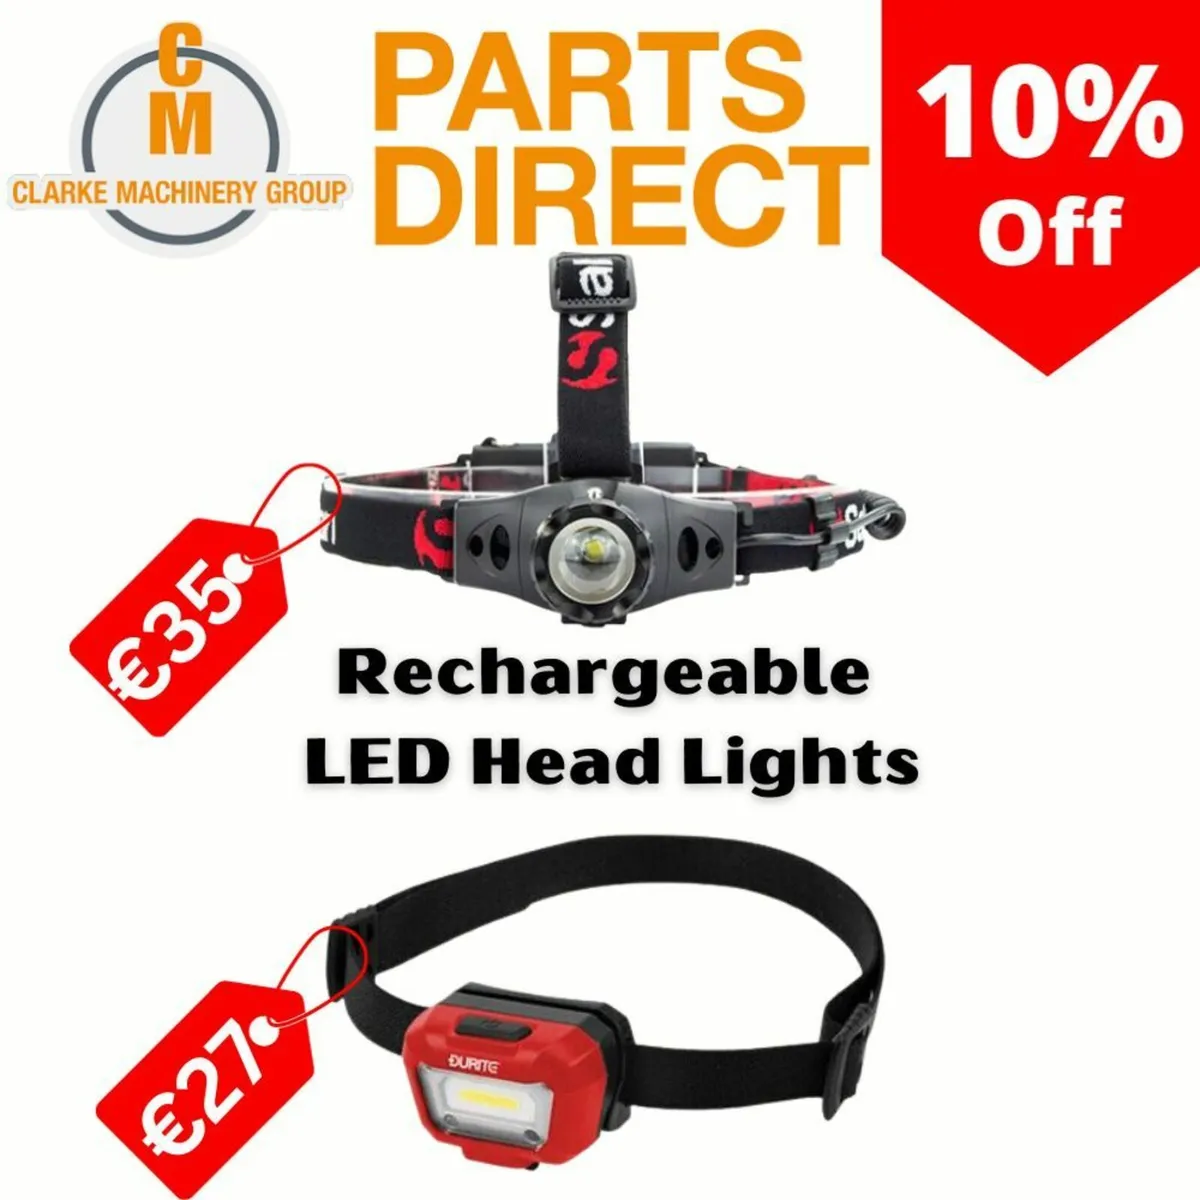 LED Head Lights 10% OFF with code WELCOME10